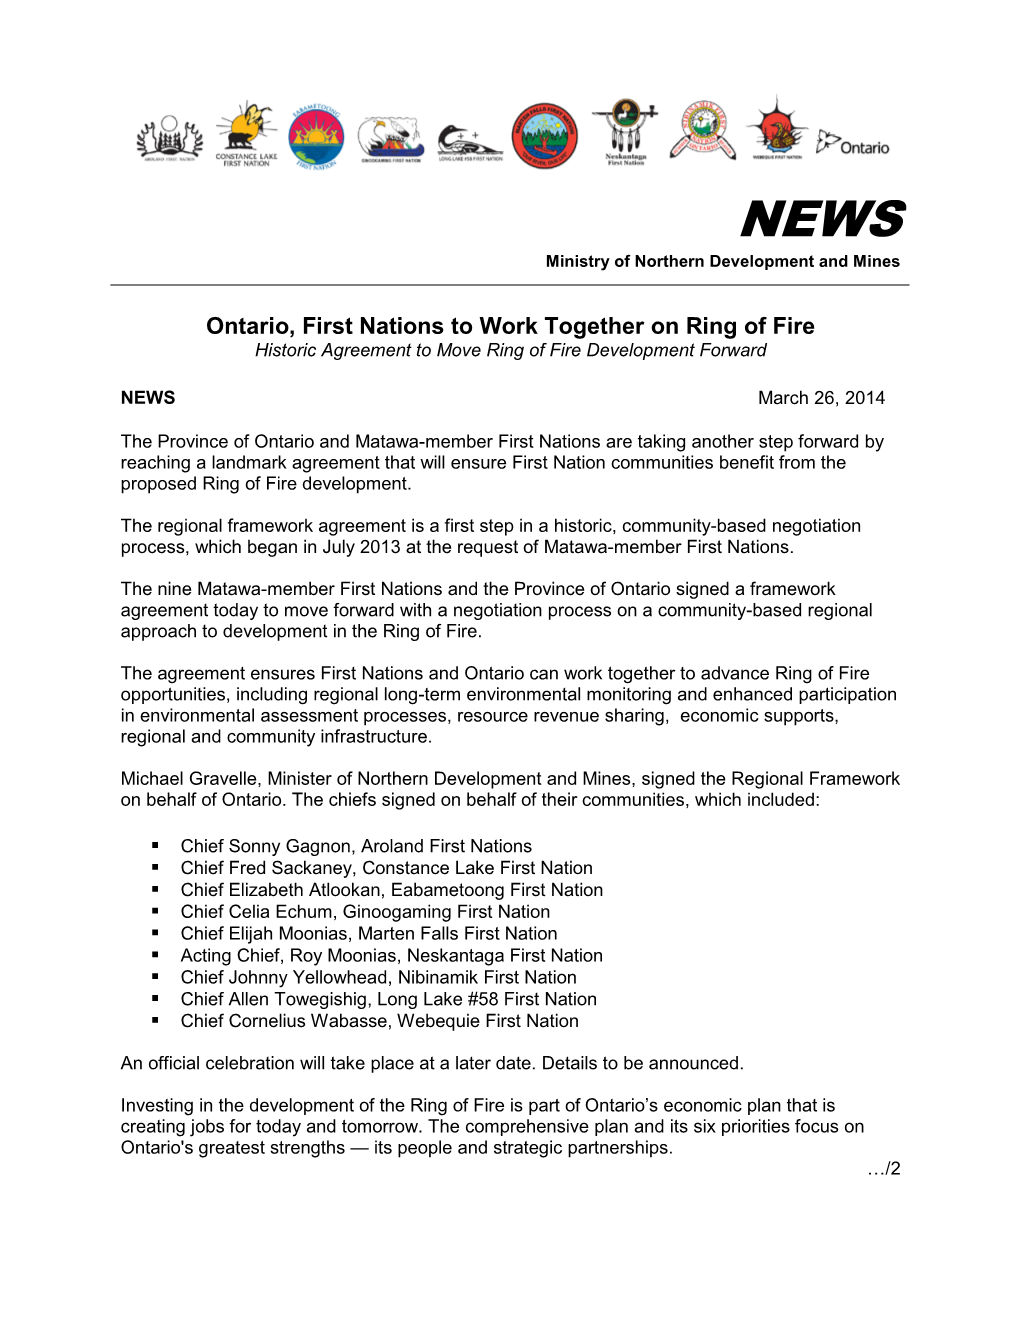 Ontario, First Nations to Work Together on Ring of Fire Historic Agreement to Move Ring of Fire Development Forward